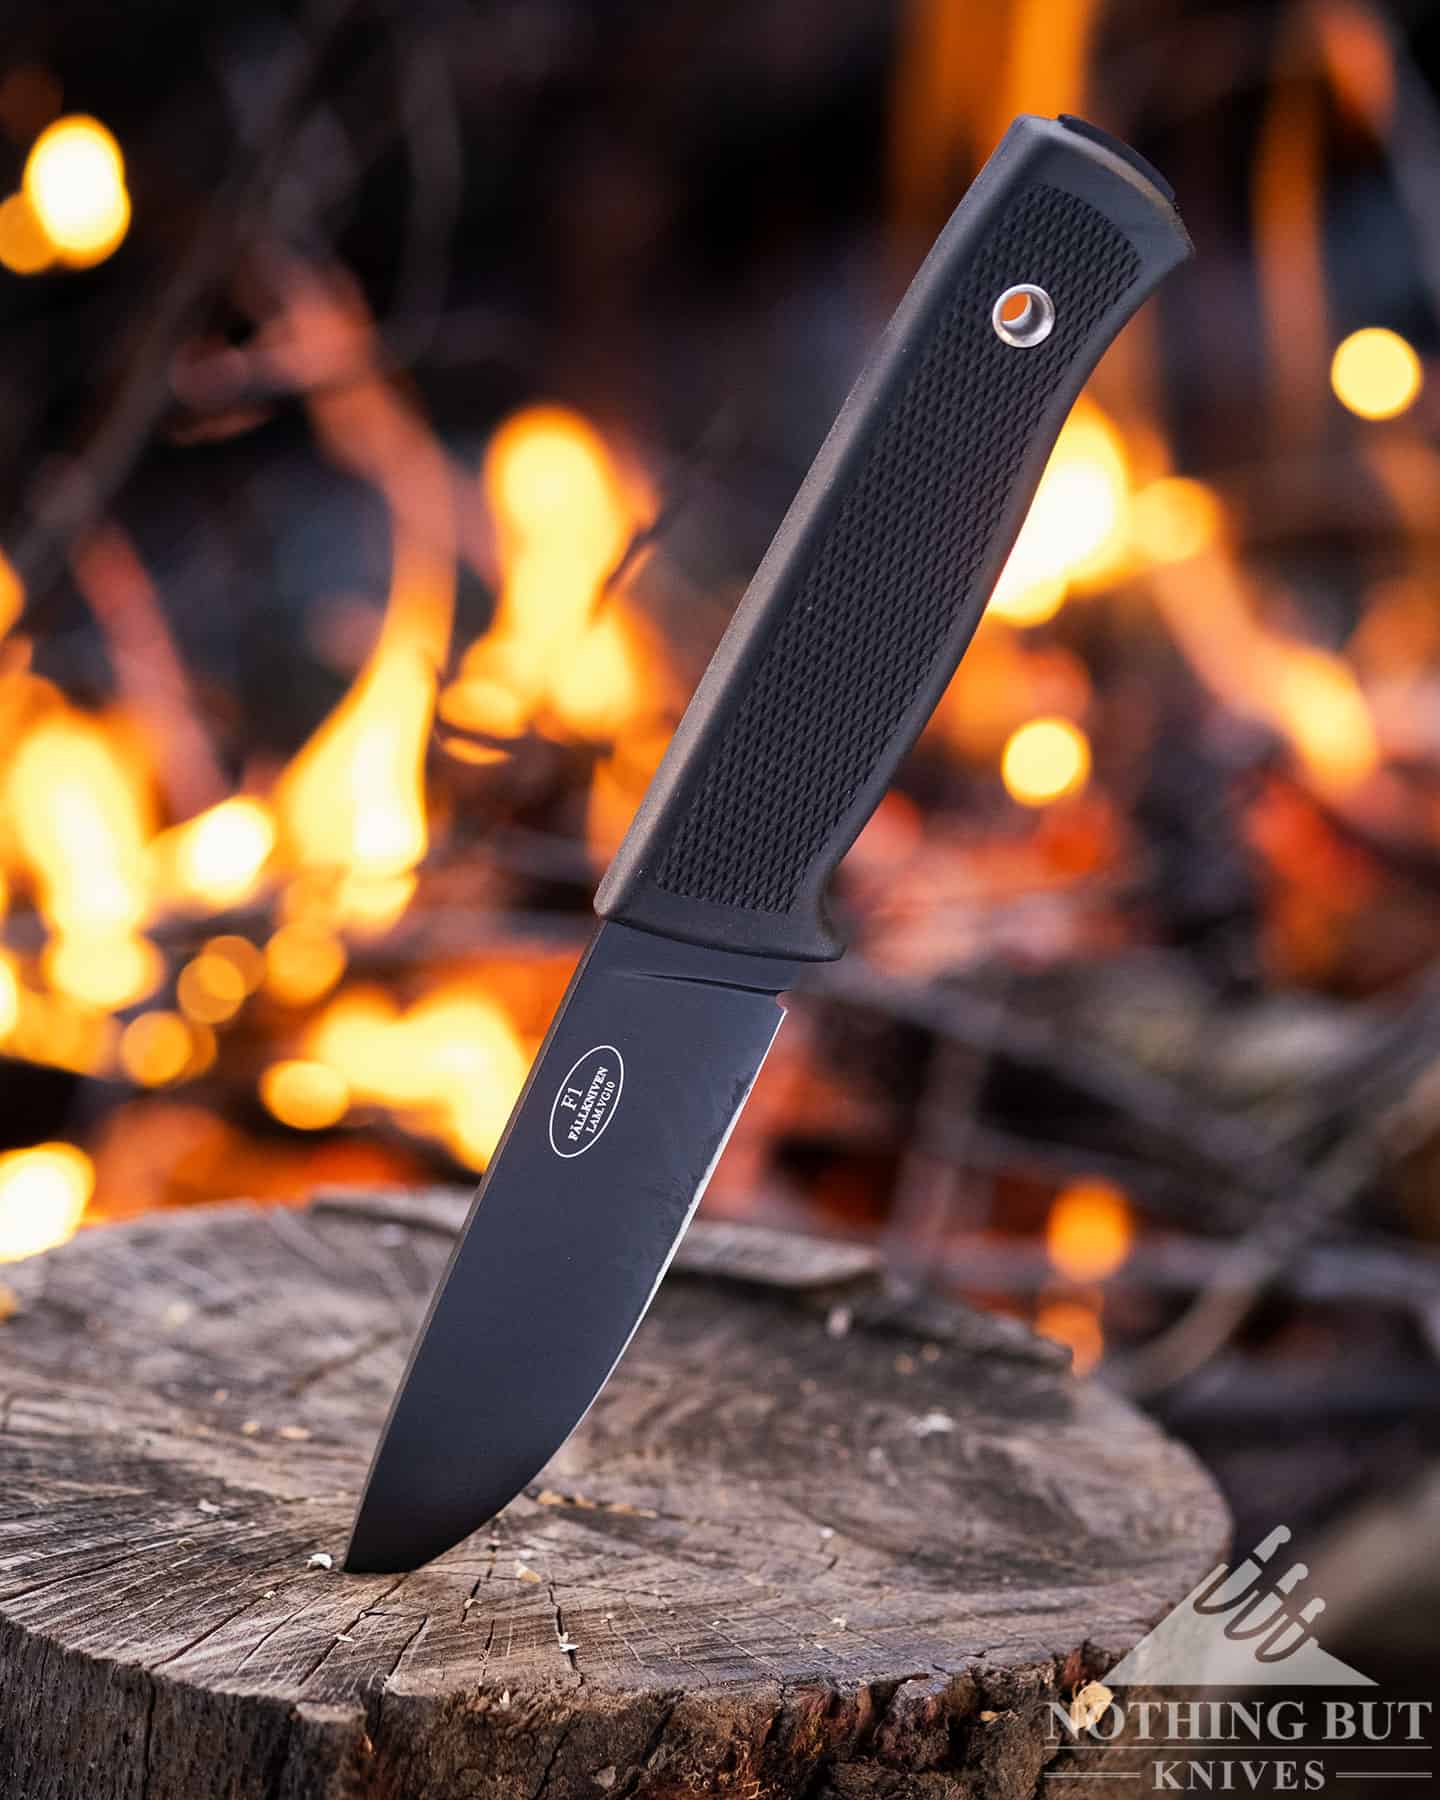 The Falkniven F1 is a classic survival style bushcraft knife. 